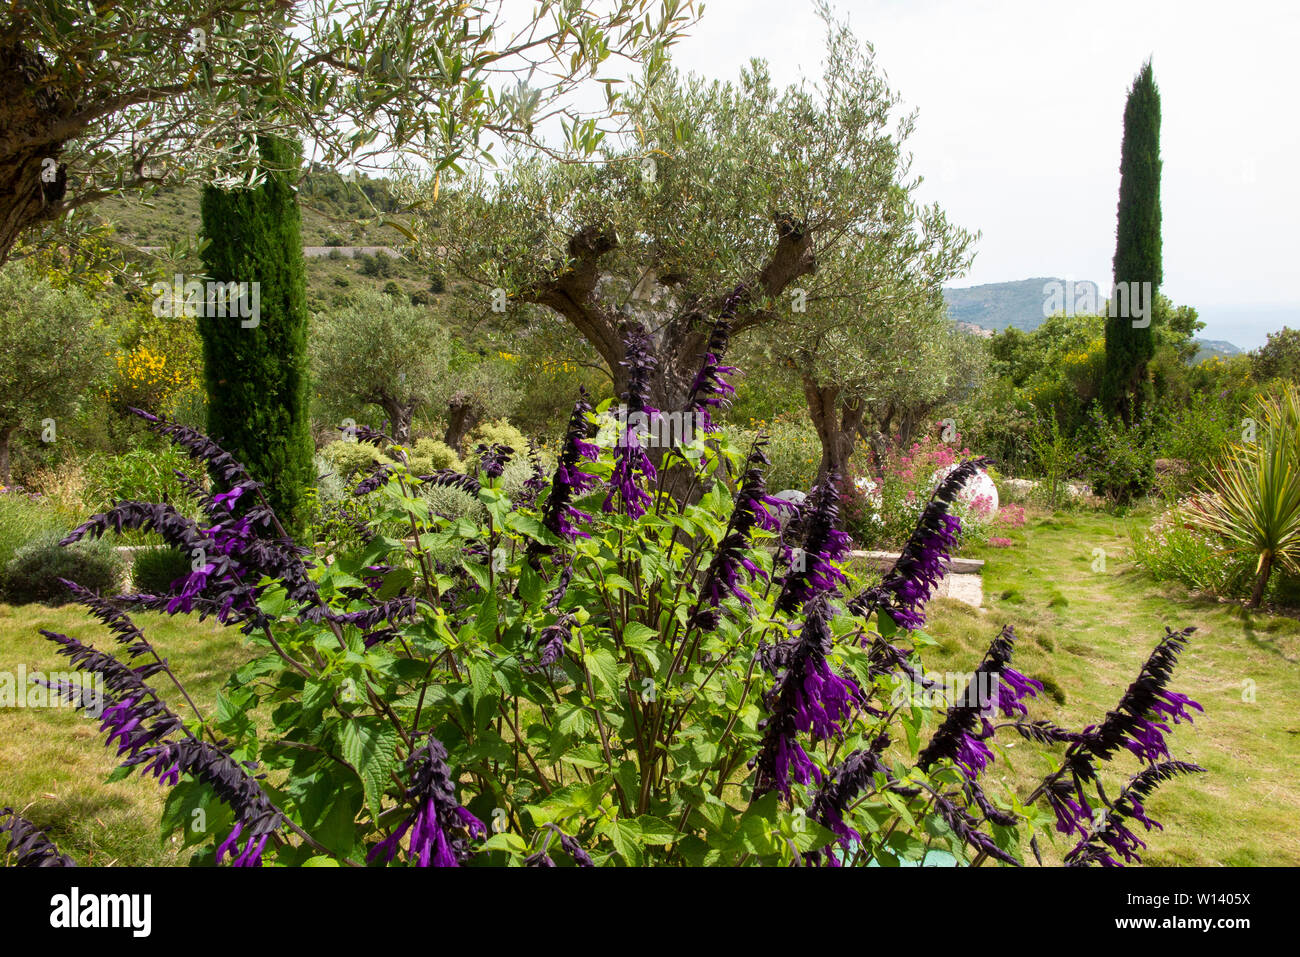 Salvia in a vibrant garden in the south of France on the Cote d'Azur between Monaco and Nice near Eze Stock Photo